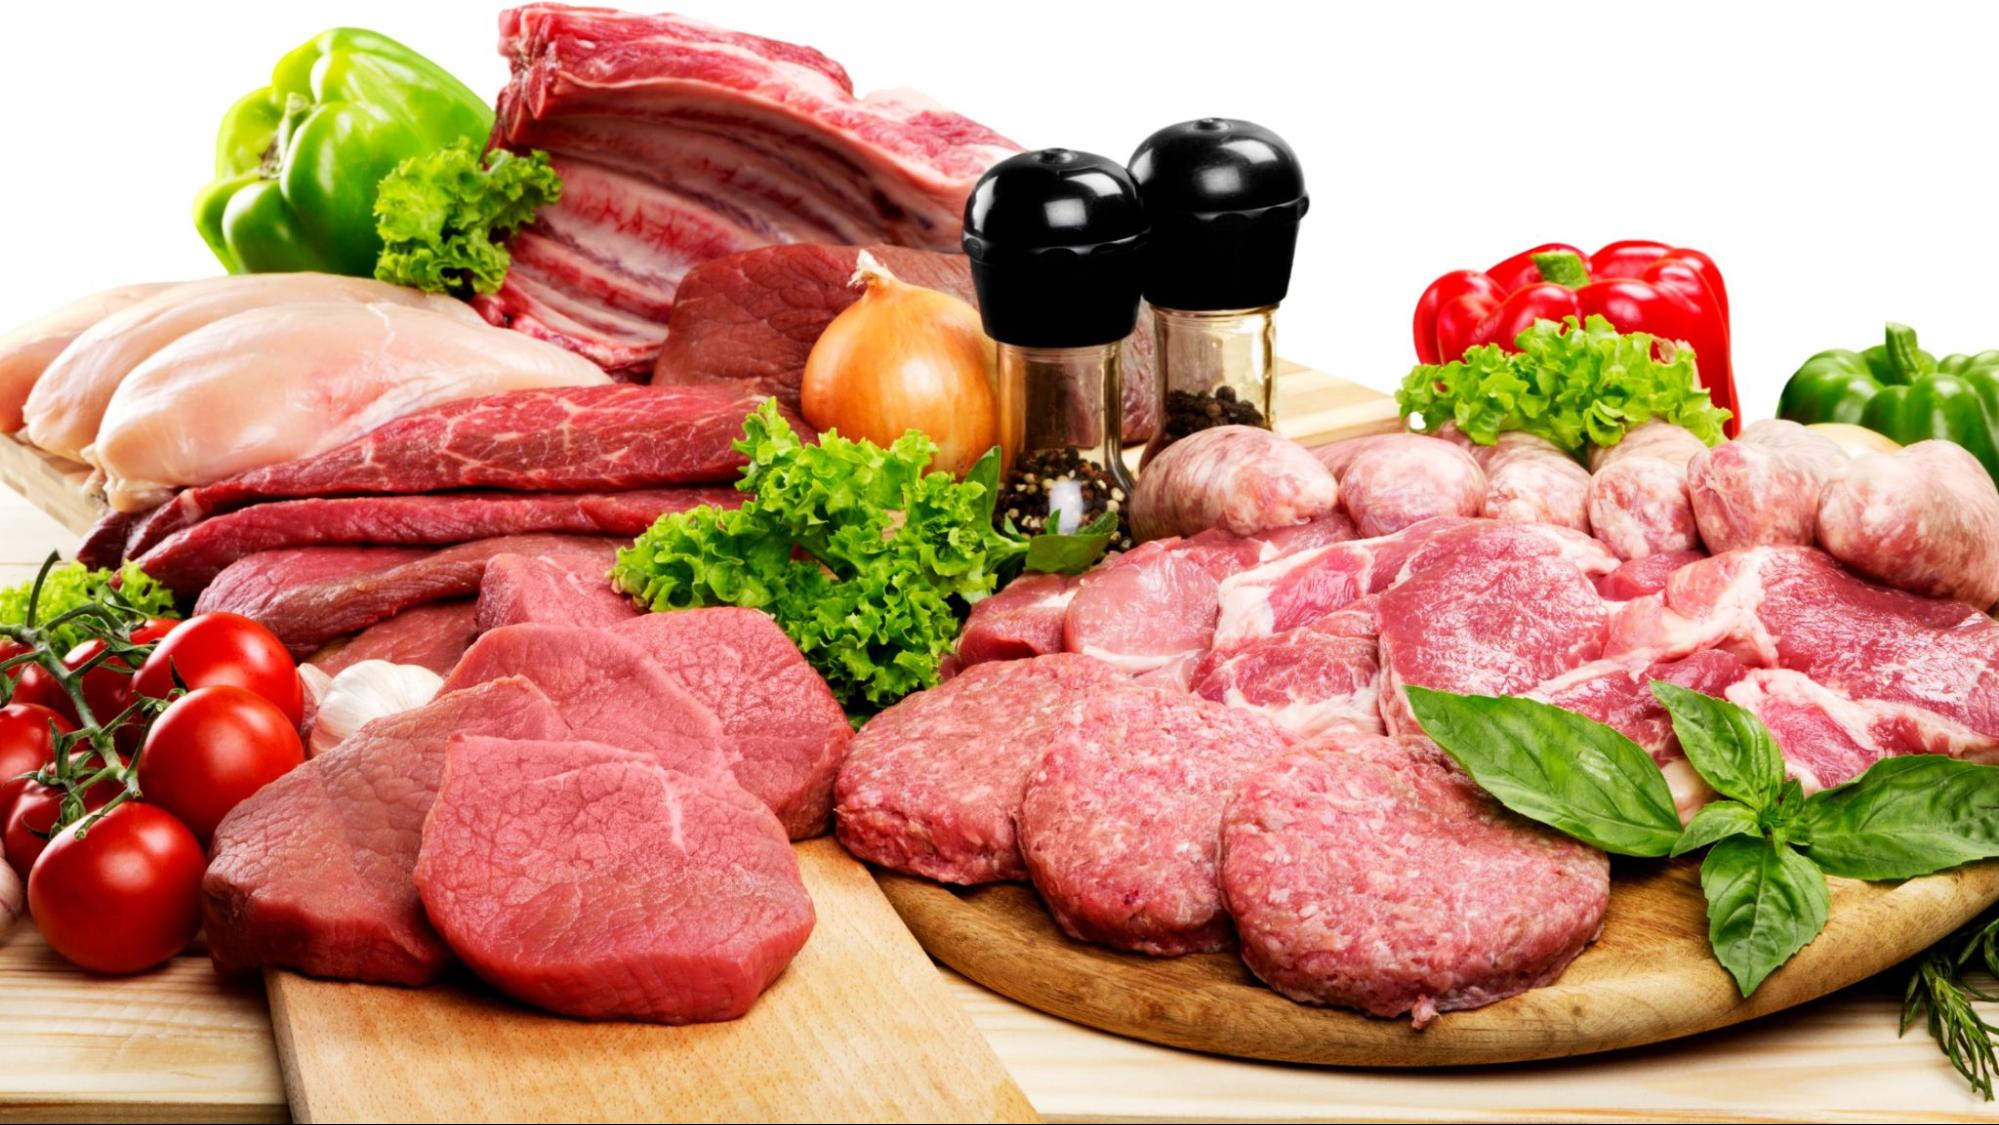 https://www.freshfarms.com/wp-content/uploads/2023/02/A-Guide-to-Choosing-the-Right-Type-of-Meat-for-Your-Meal.jpg